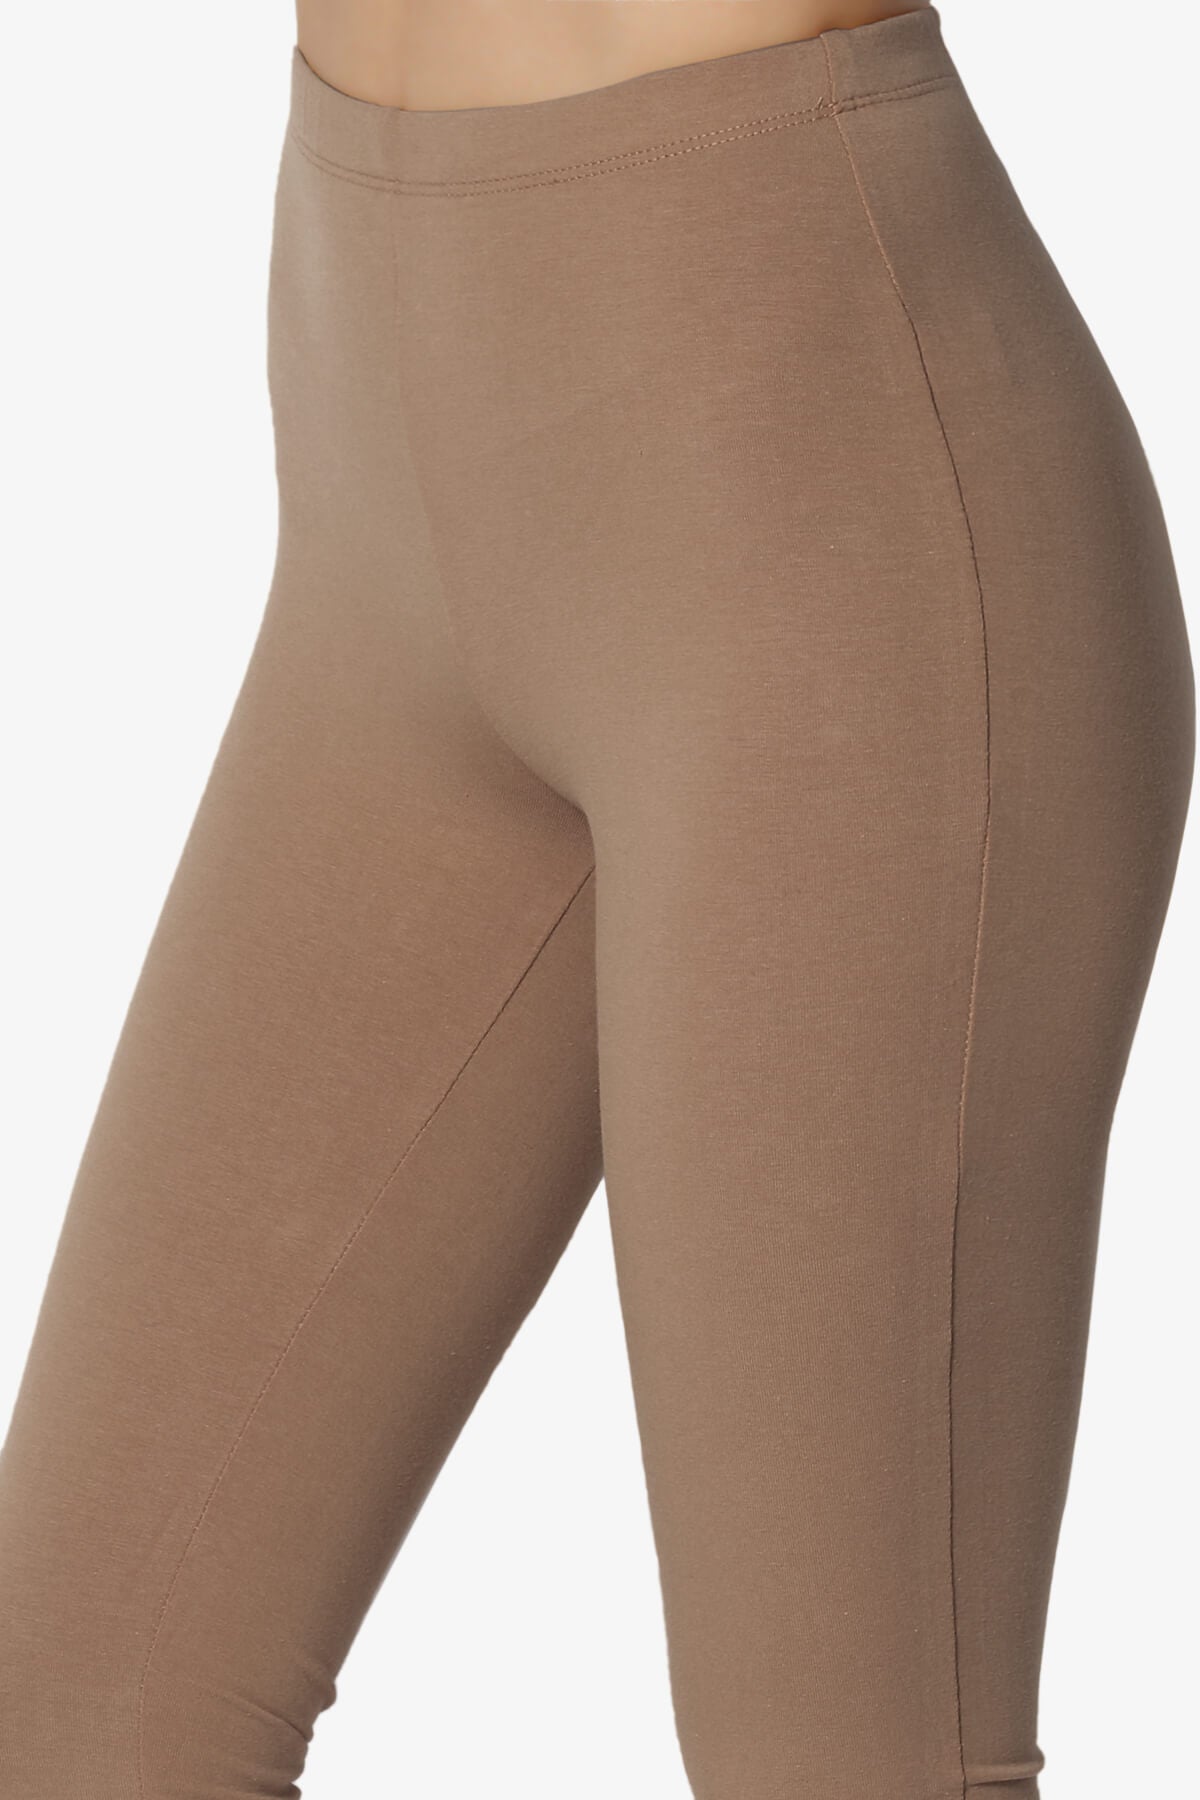 Load image into Gallery viewer, Ansley Luxe Cotton Capri Leggings MOCHA_5
